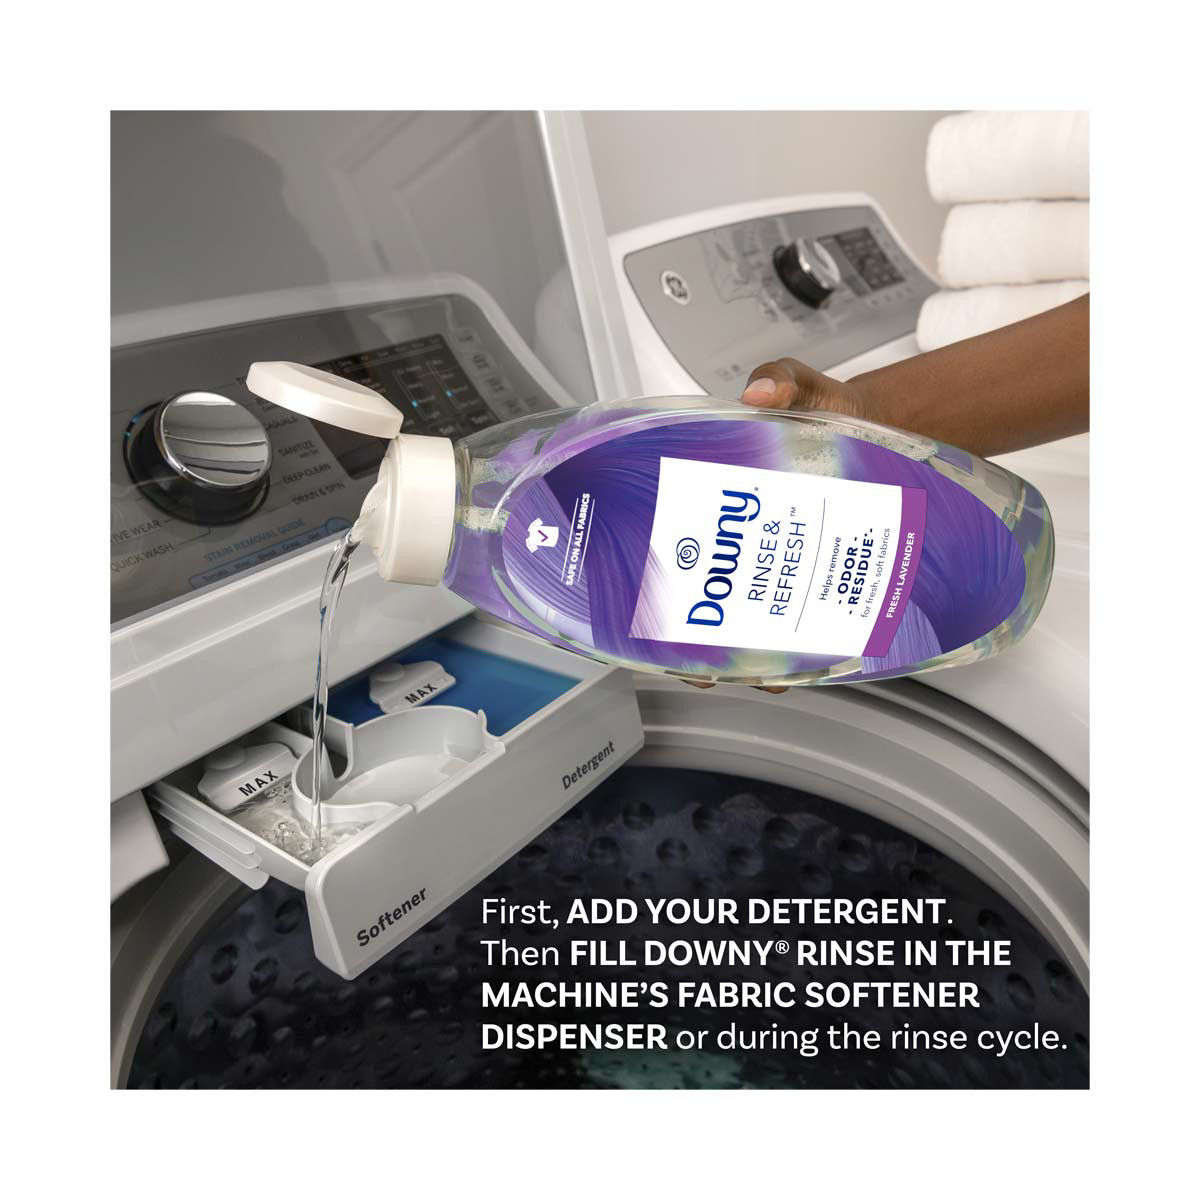 Downy Rinse & Refresh Laundry Review